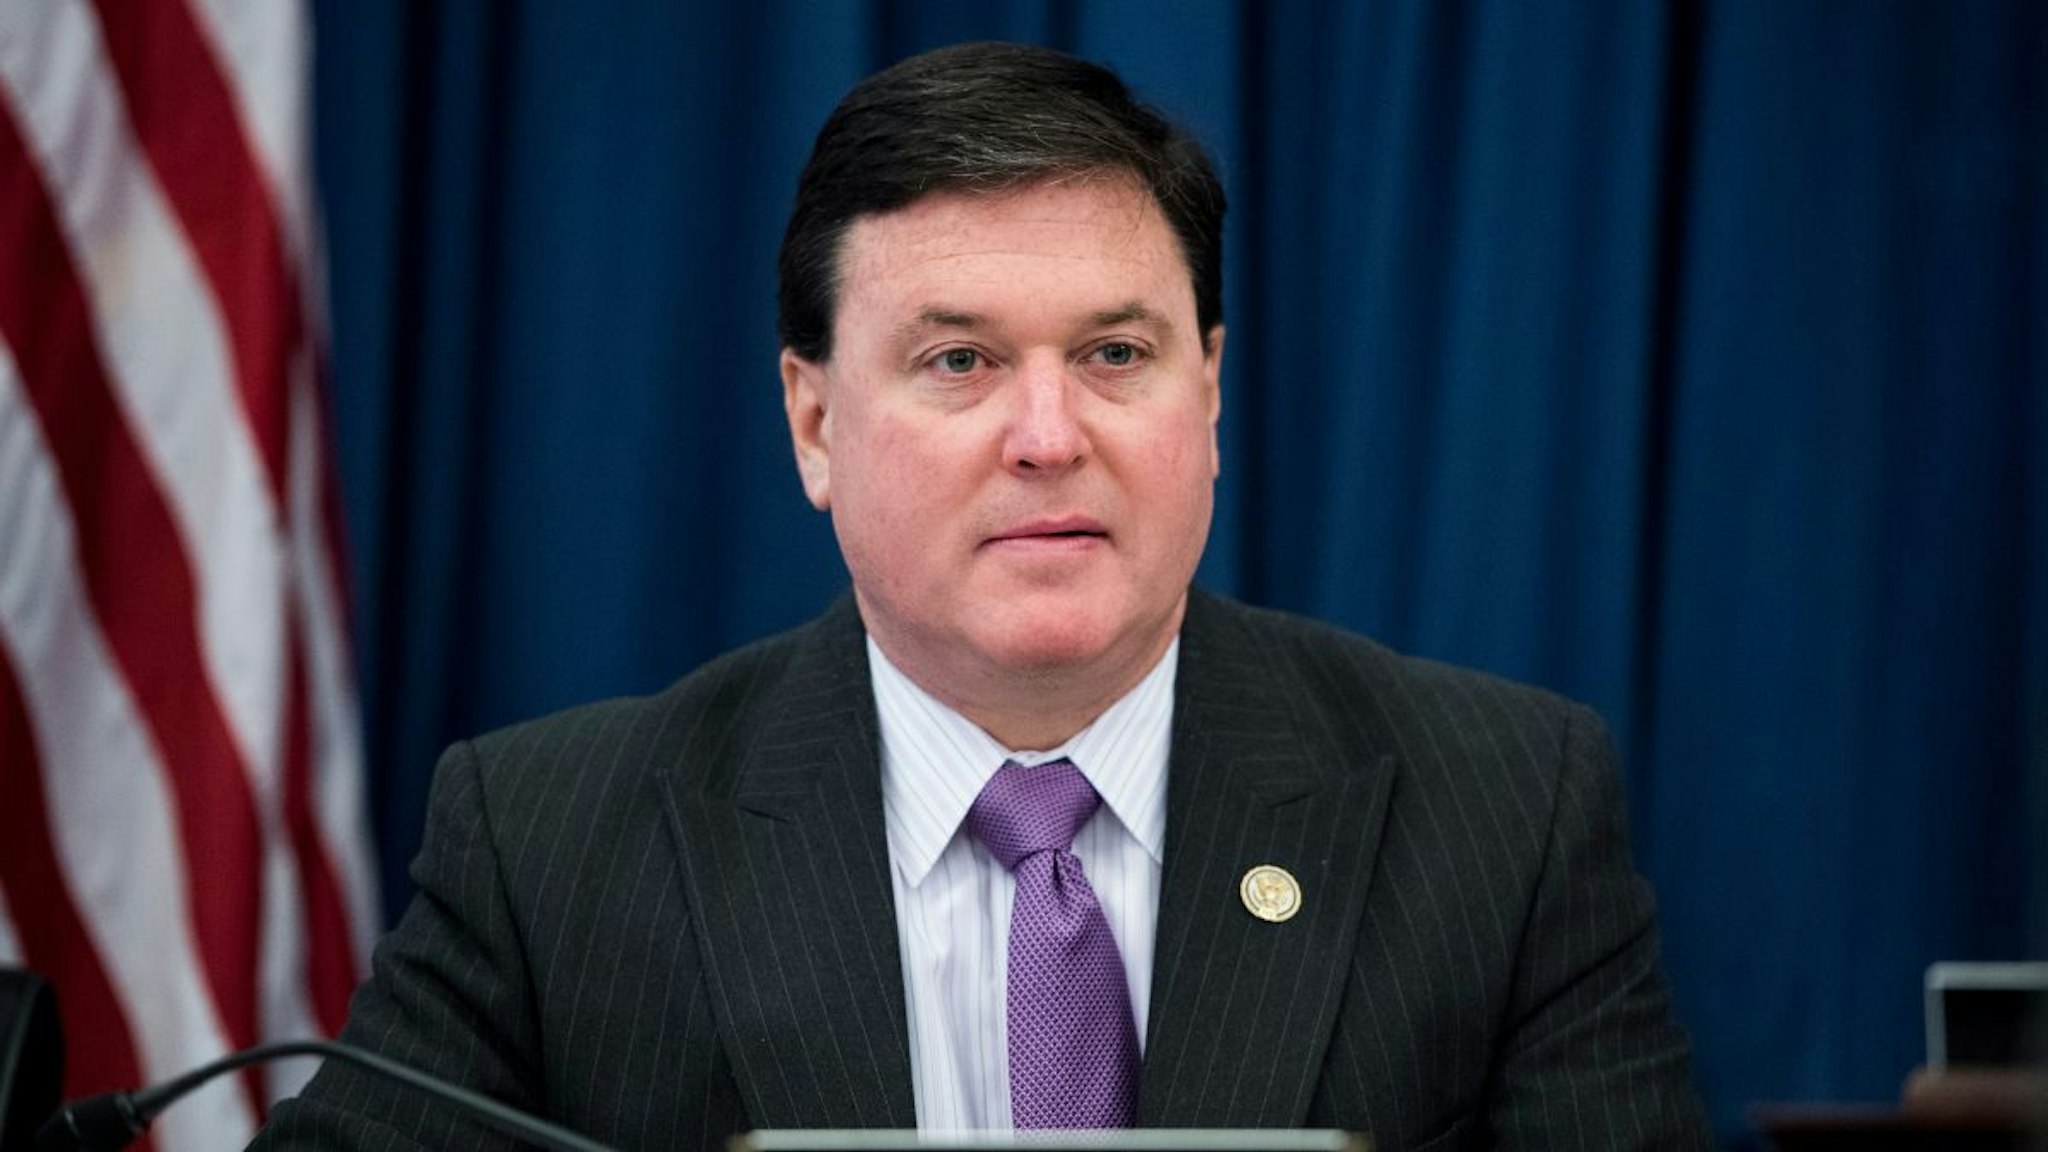 Rep. Todd Rokita, R-Ind., takes his seat for the House Budget Committee hearing on "The Congressional Budget Office's (CBO) Budget and Economic Outlook" on Tuesday, Jan. 27, 2015.